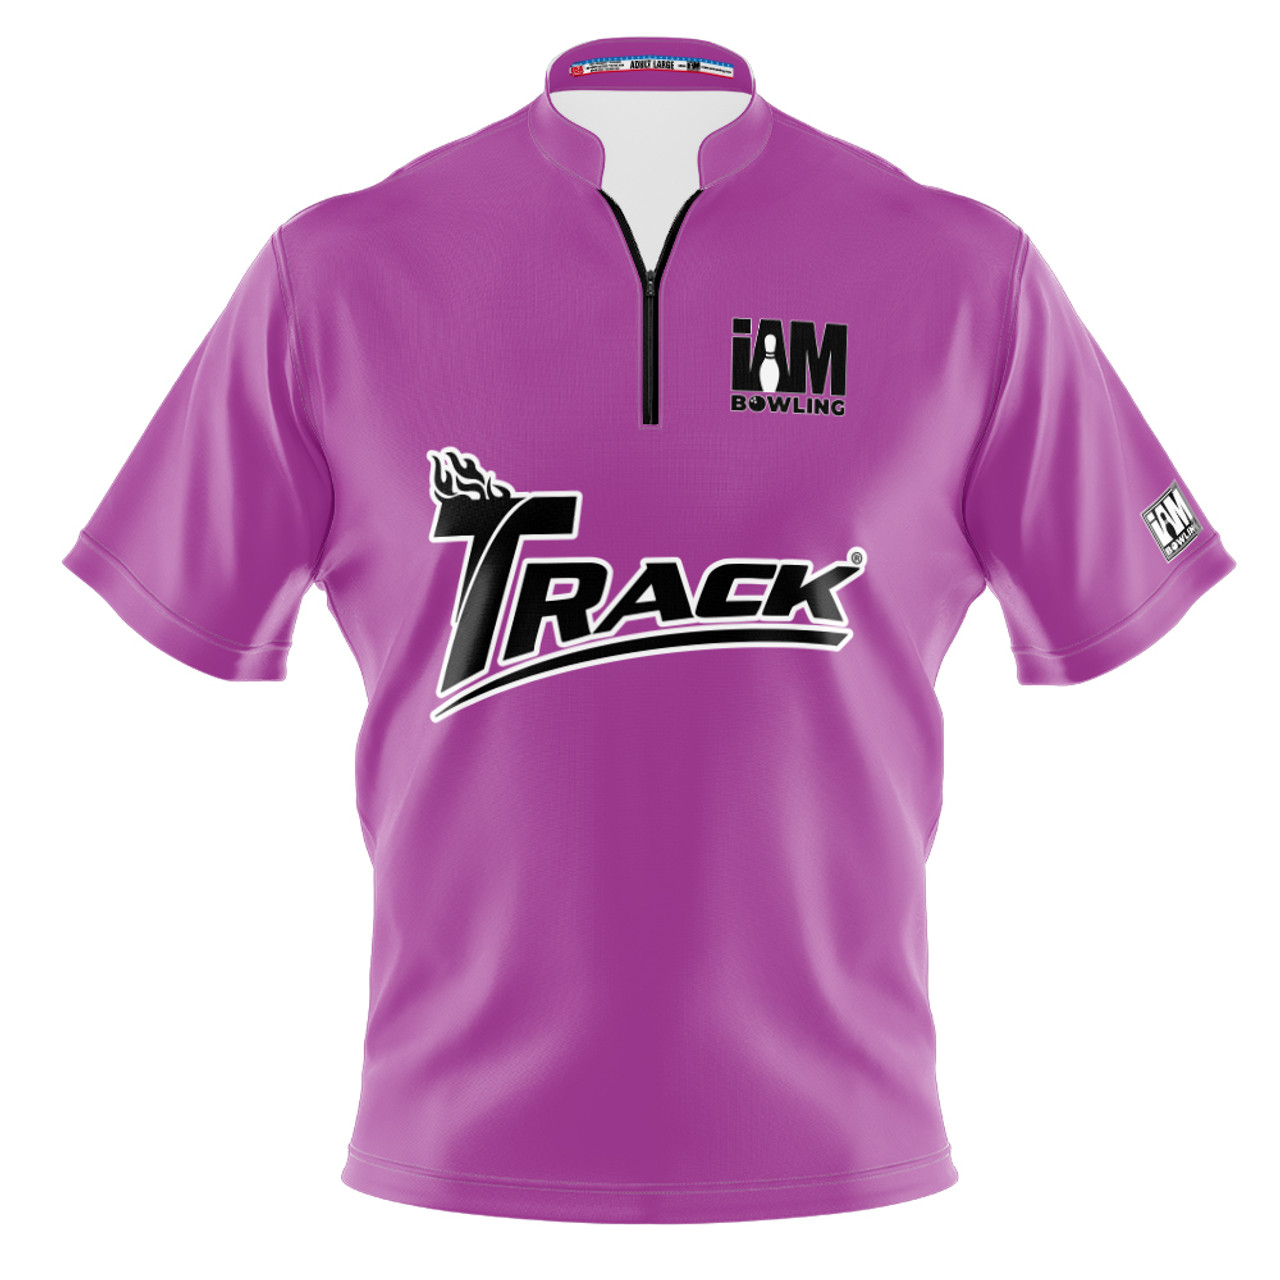 Track DS Bowling Jersey - Design 2022-TR